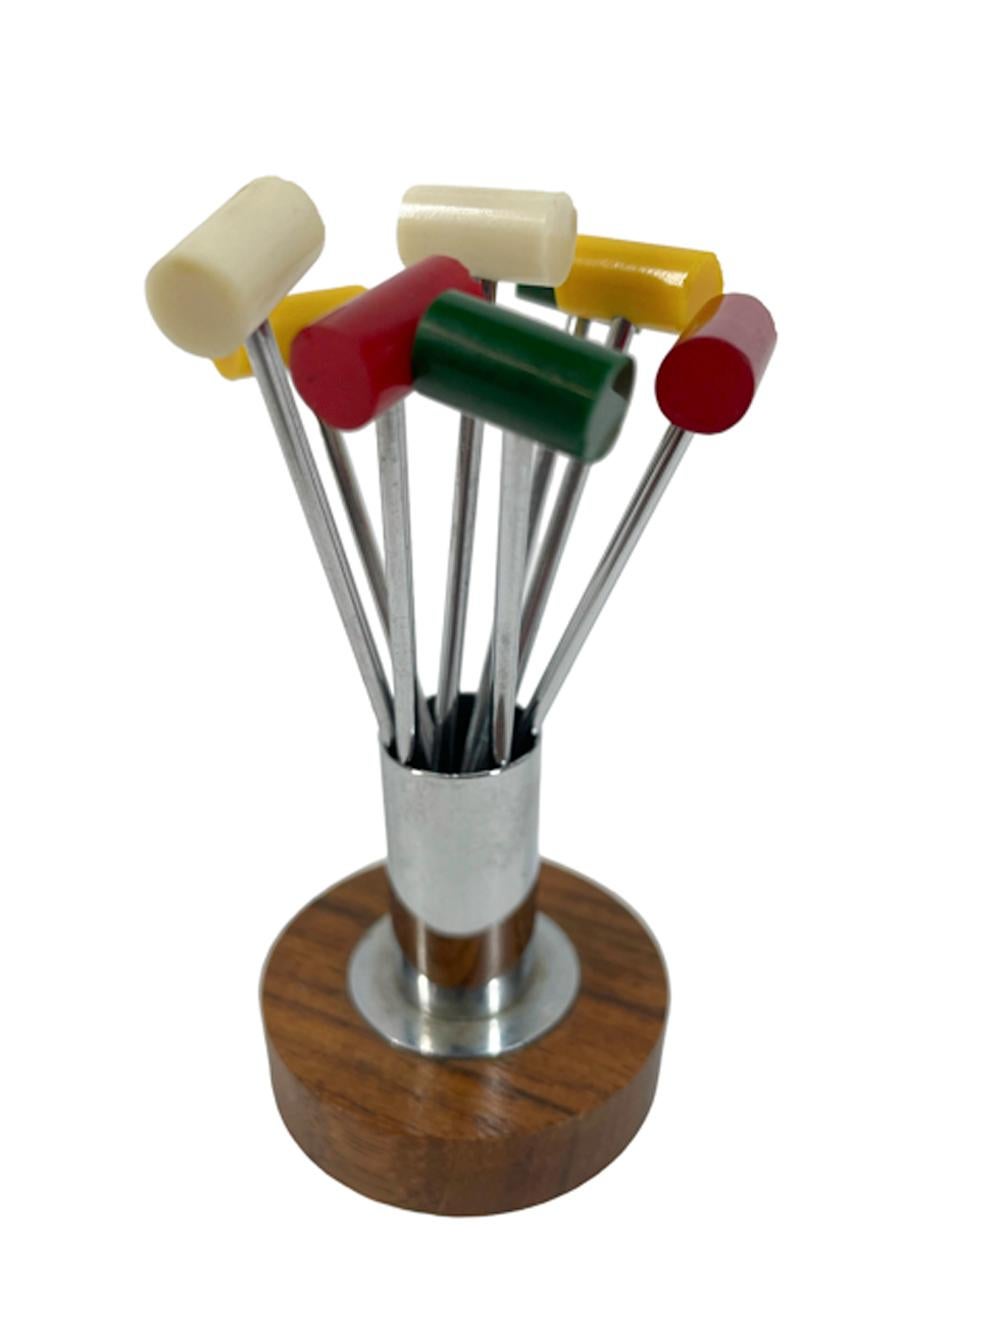 Eight Art Deco cocktail picks in the form of polo or croquet mallets with forked tips and Bakelite heads (two each of four colors) in a stand made as a chrome cylinder atop a disk of wood.